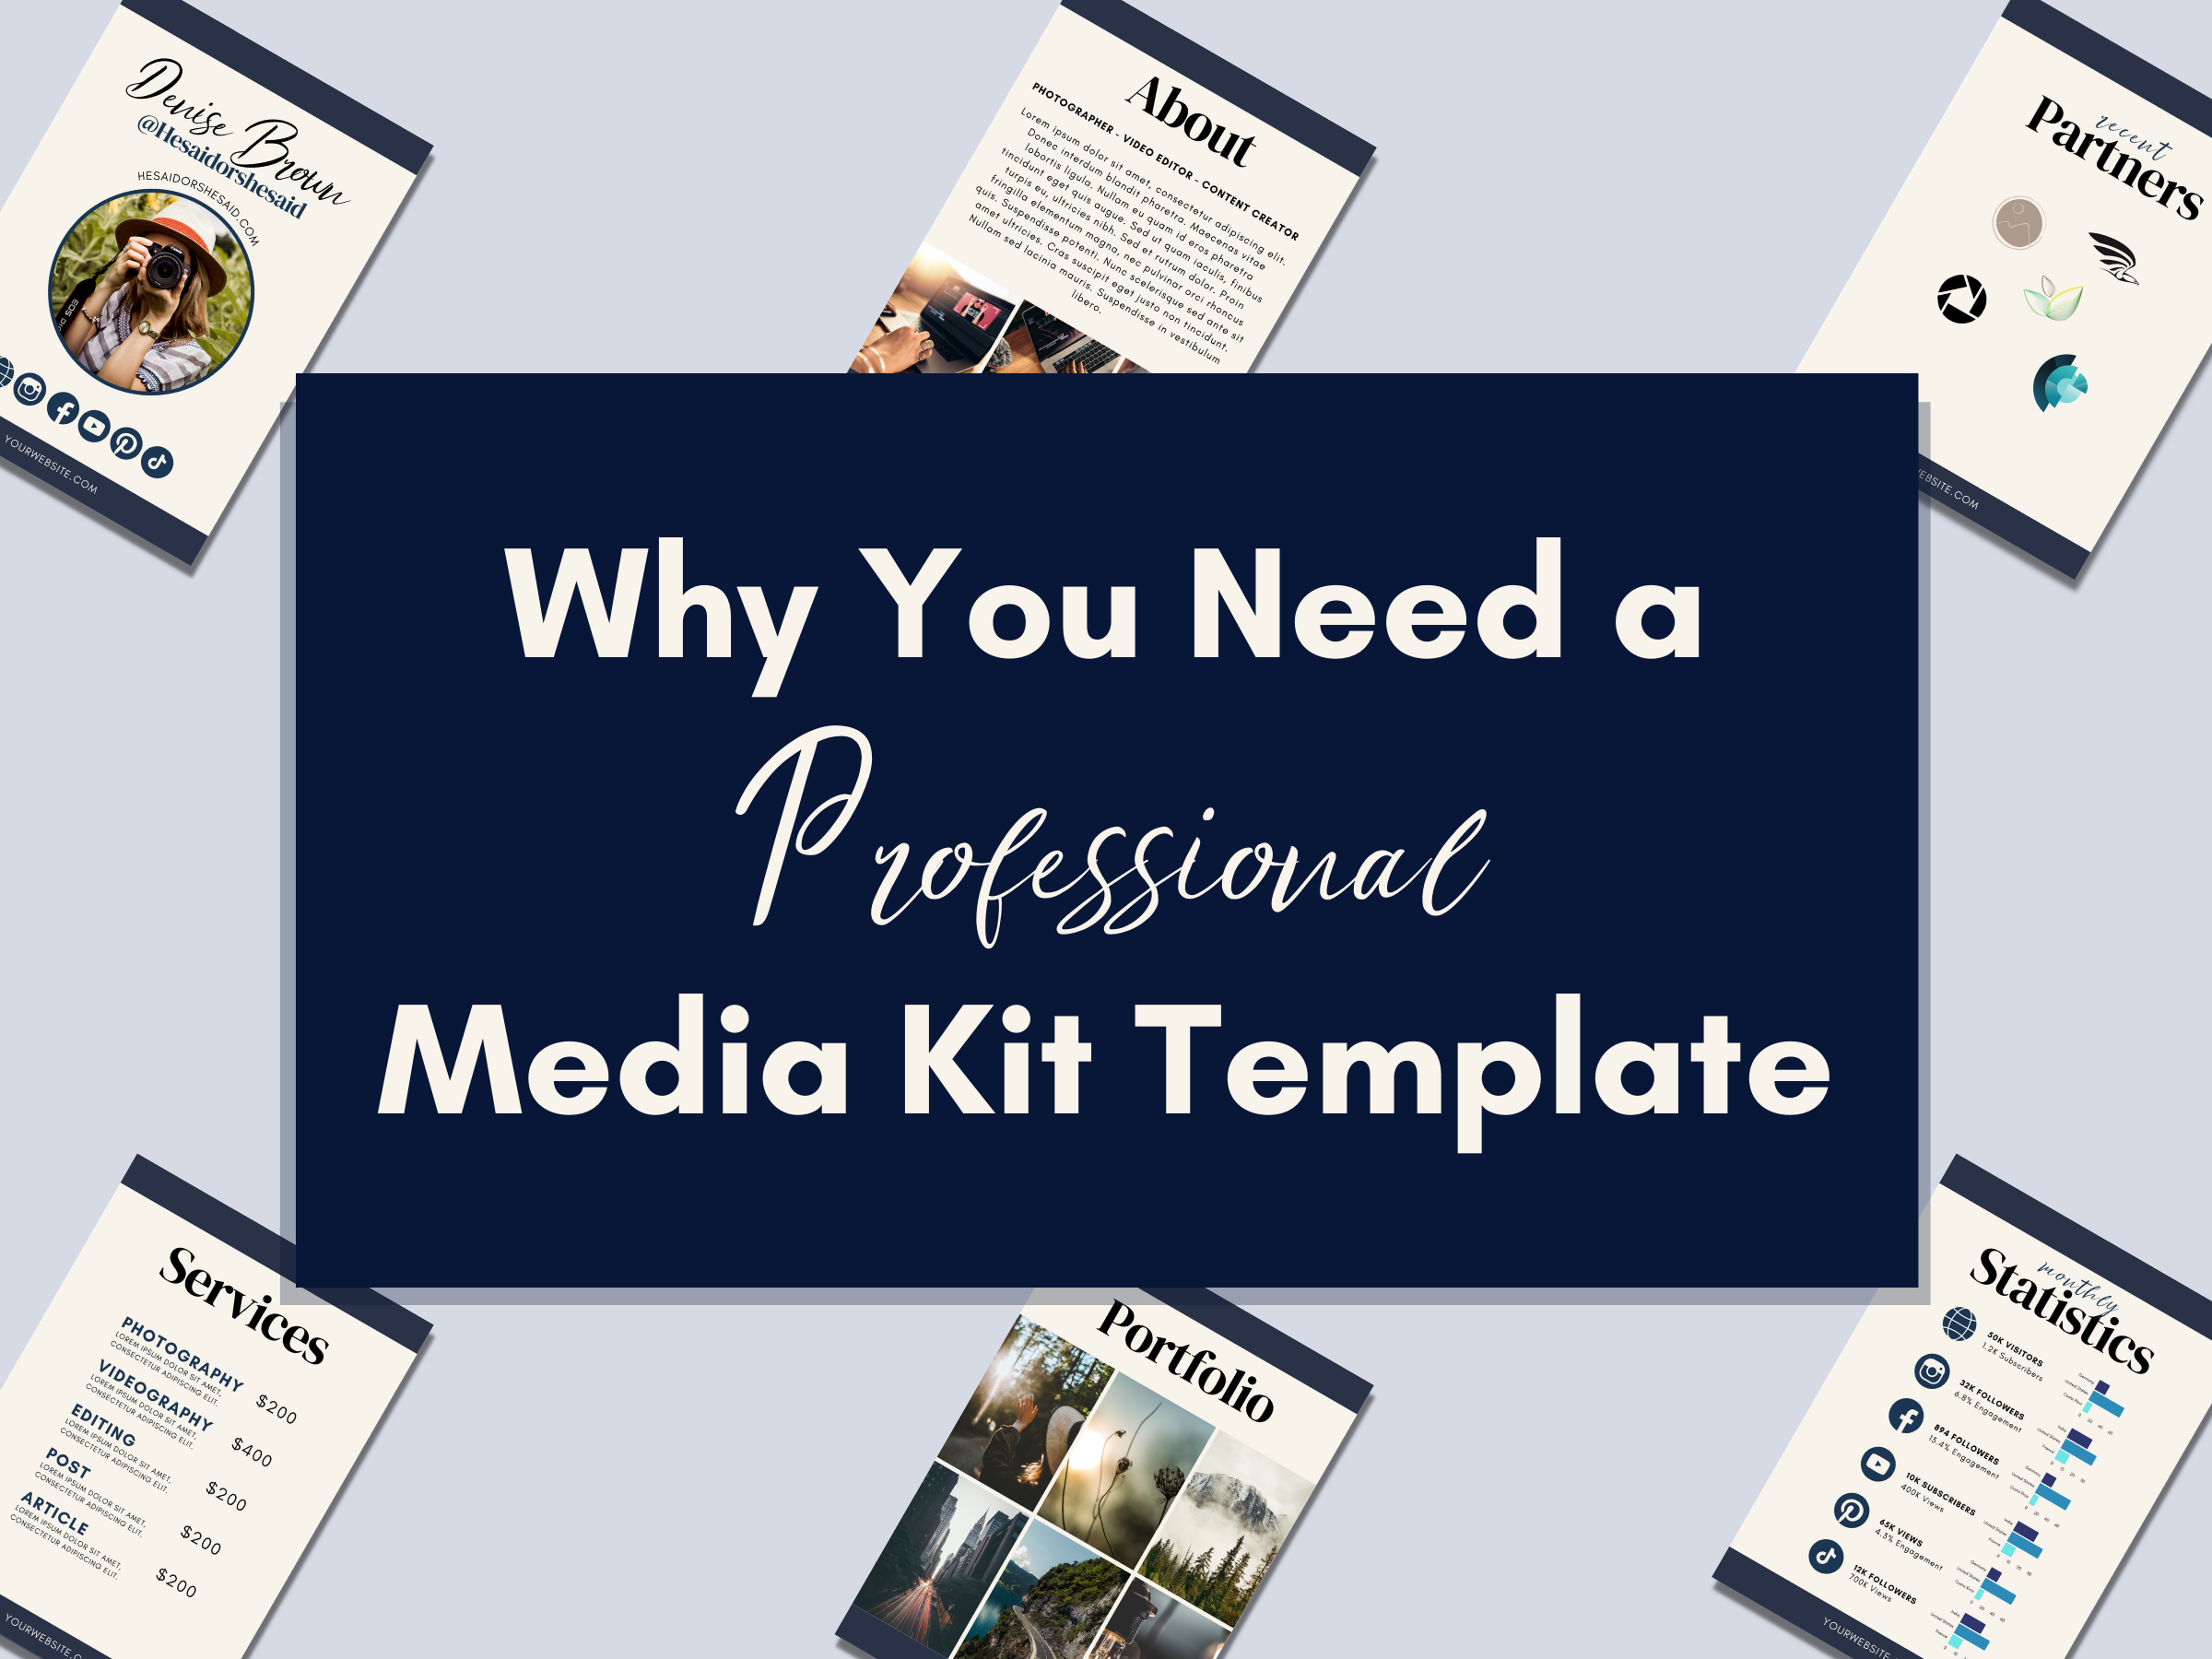 Why You Need a Professional Media Kit Template